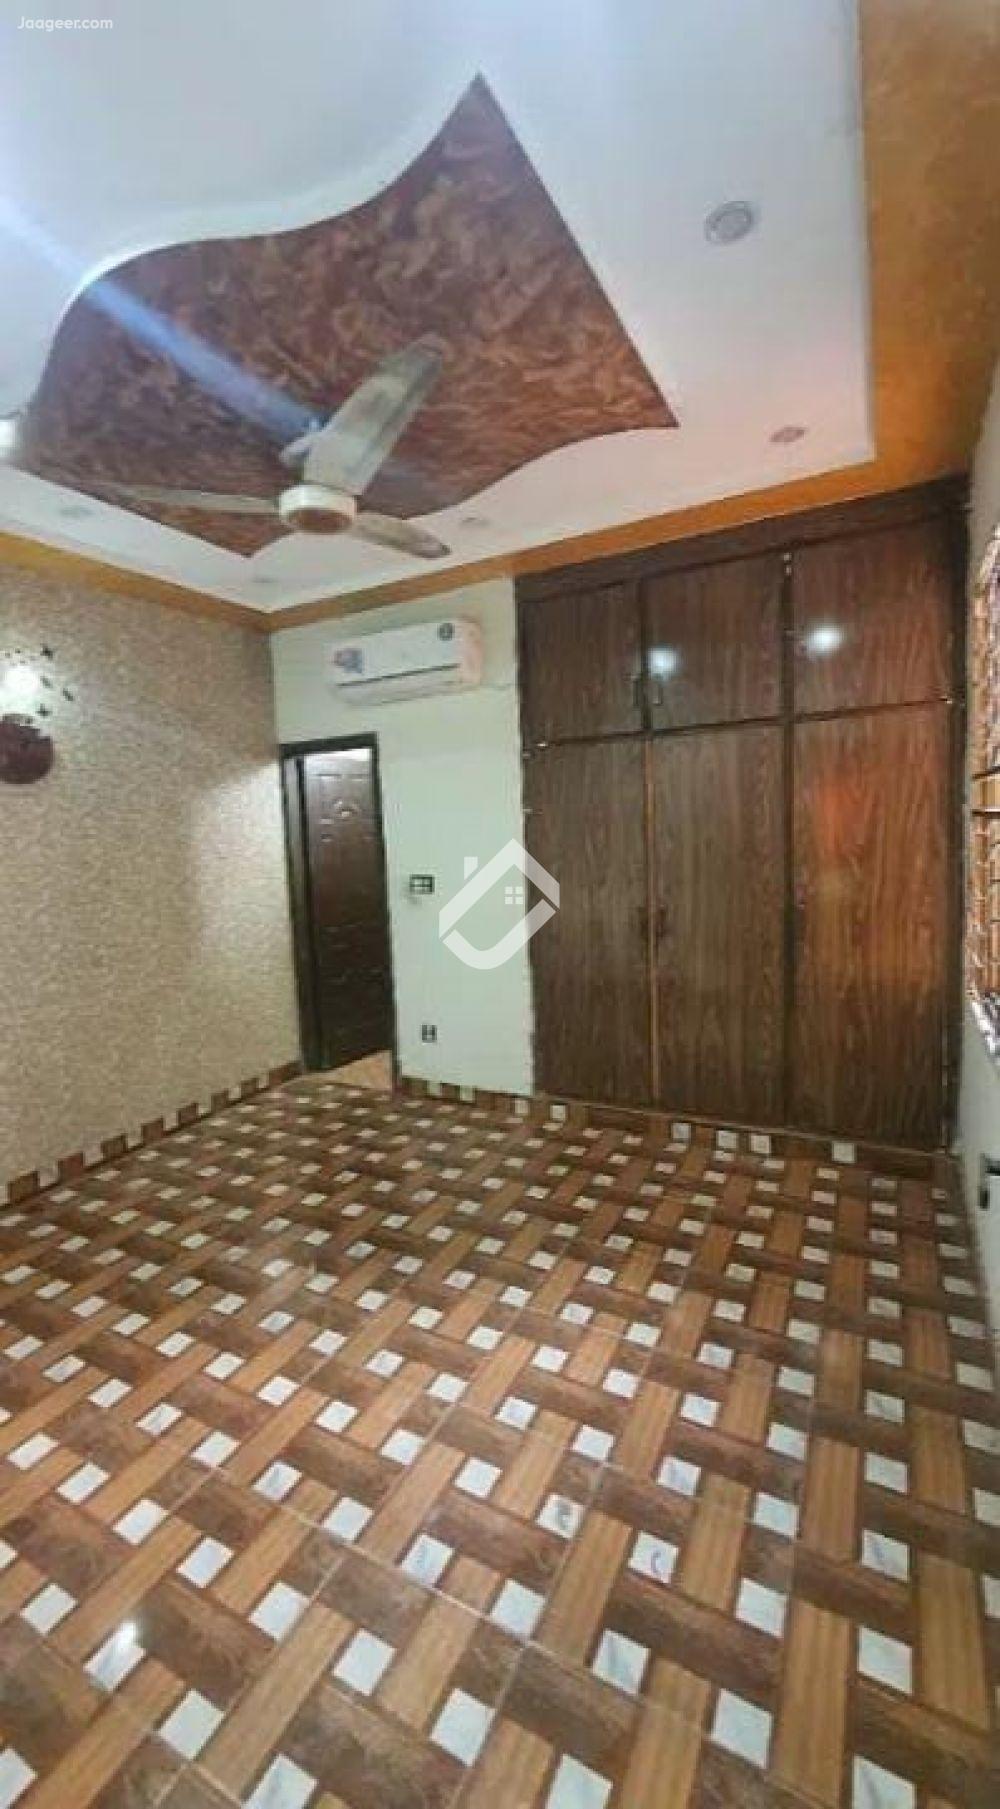 View  3 Marla Double Storey House For Rent In Pak Arab Society  in Pak Arab Society , Lahore